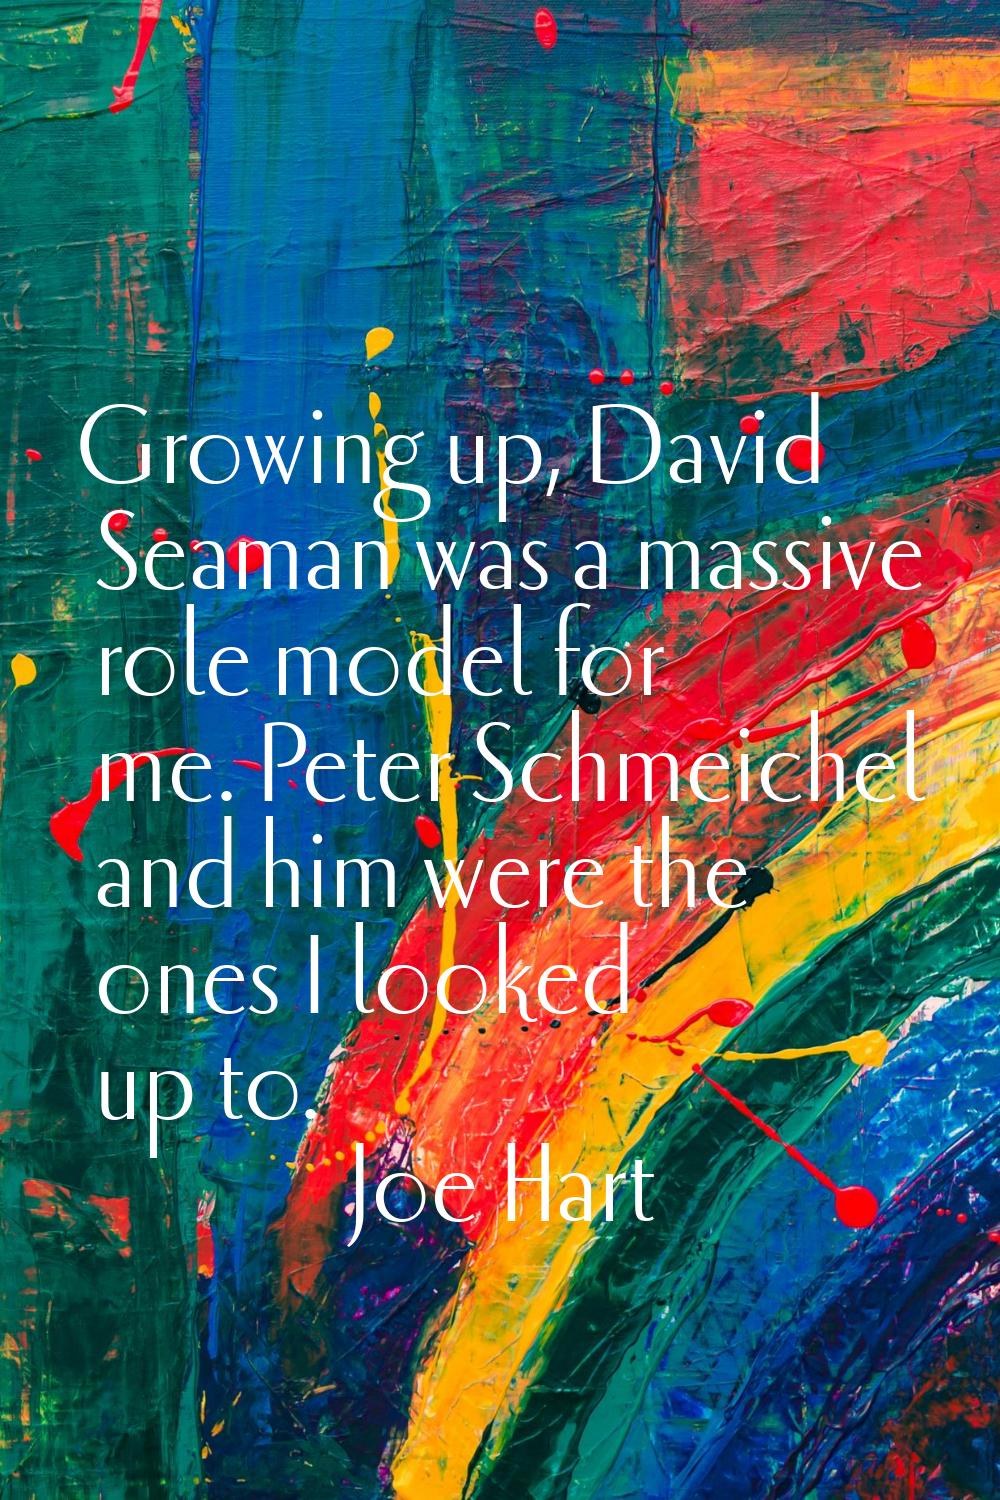 Growing up, David Seaman was a massive role model for me. Peter Schmeichel and him were the ones I 